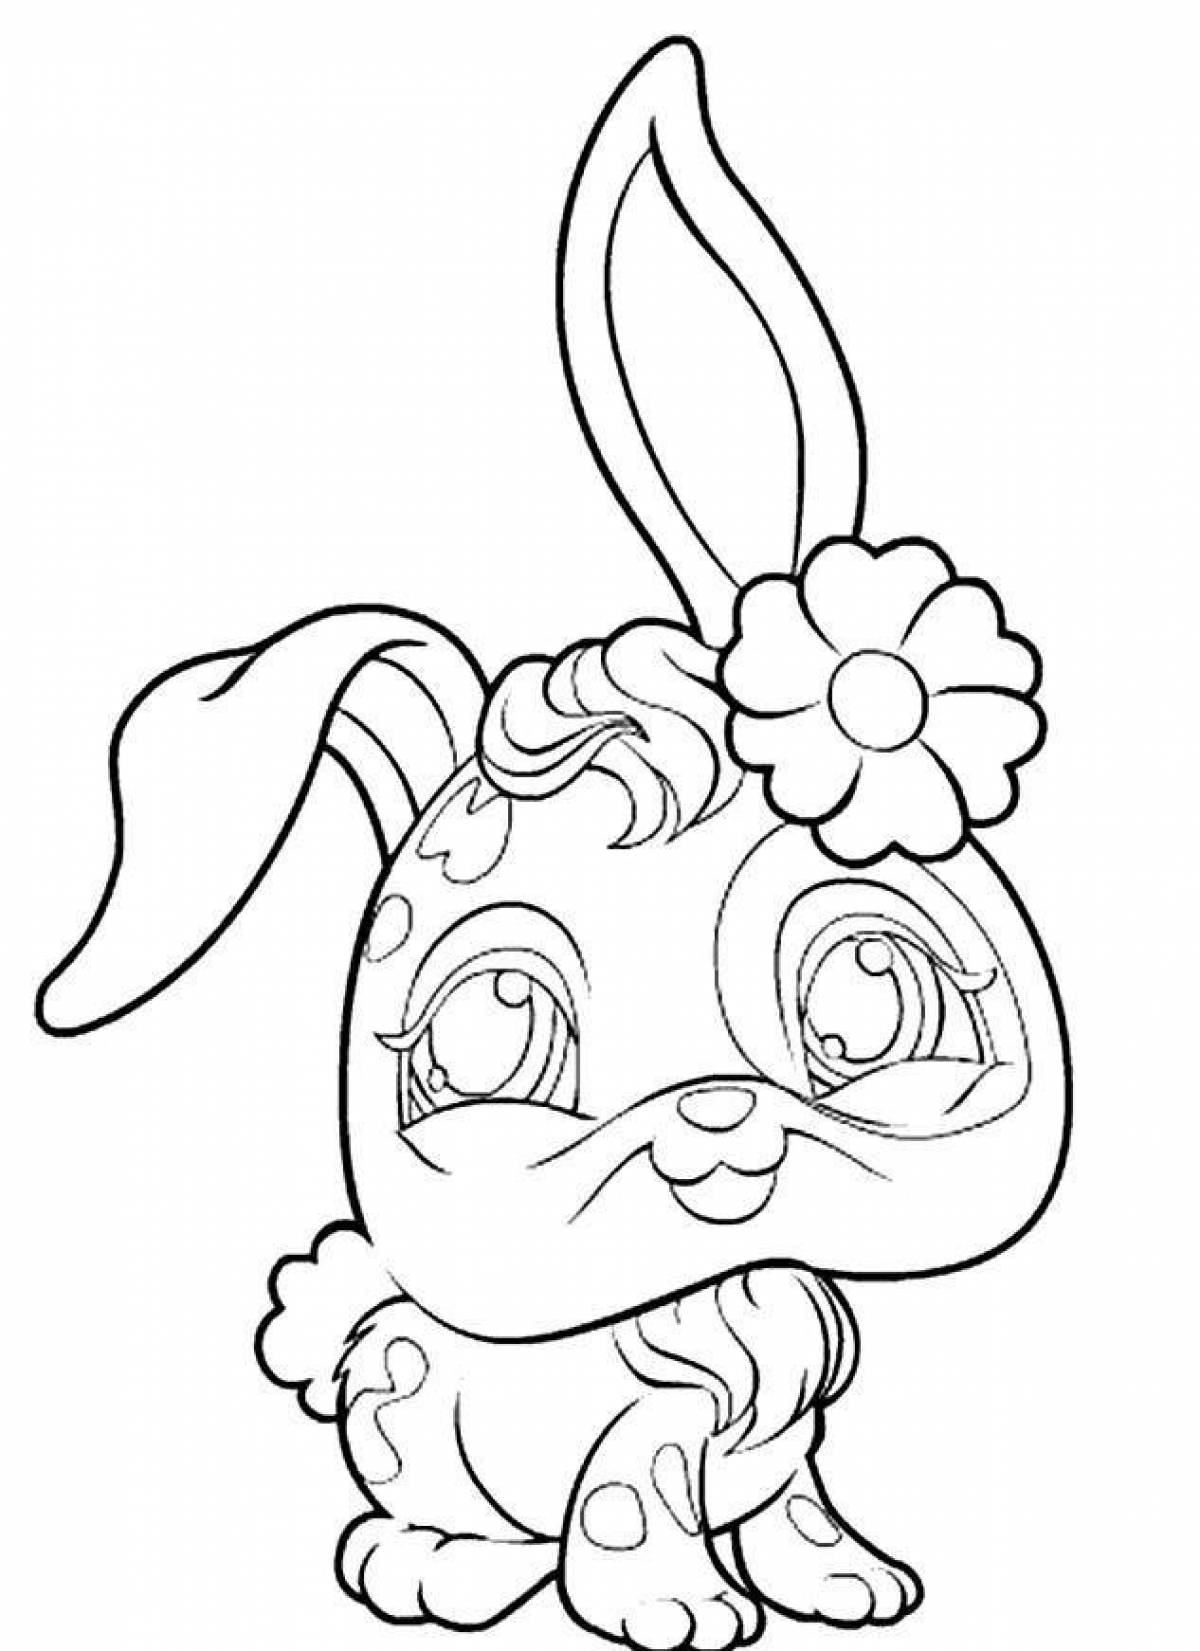 Colorful coloring book for bunny girls